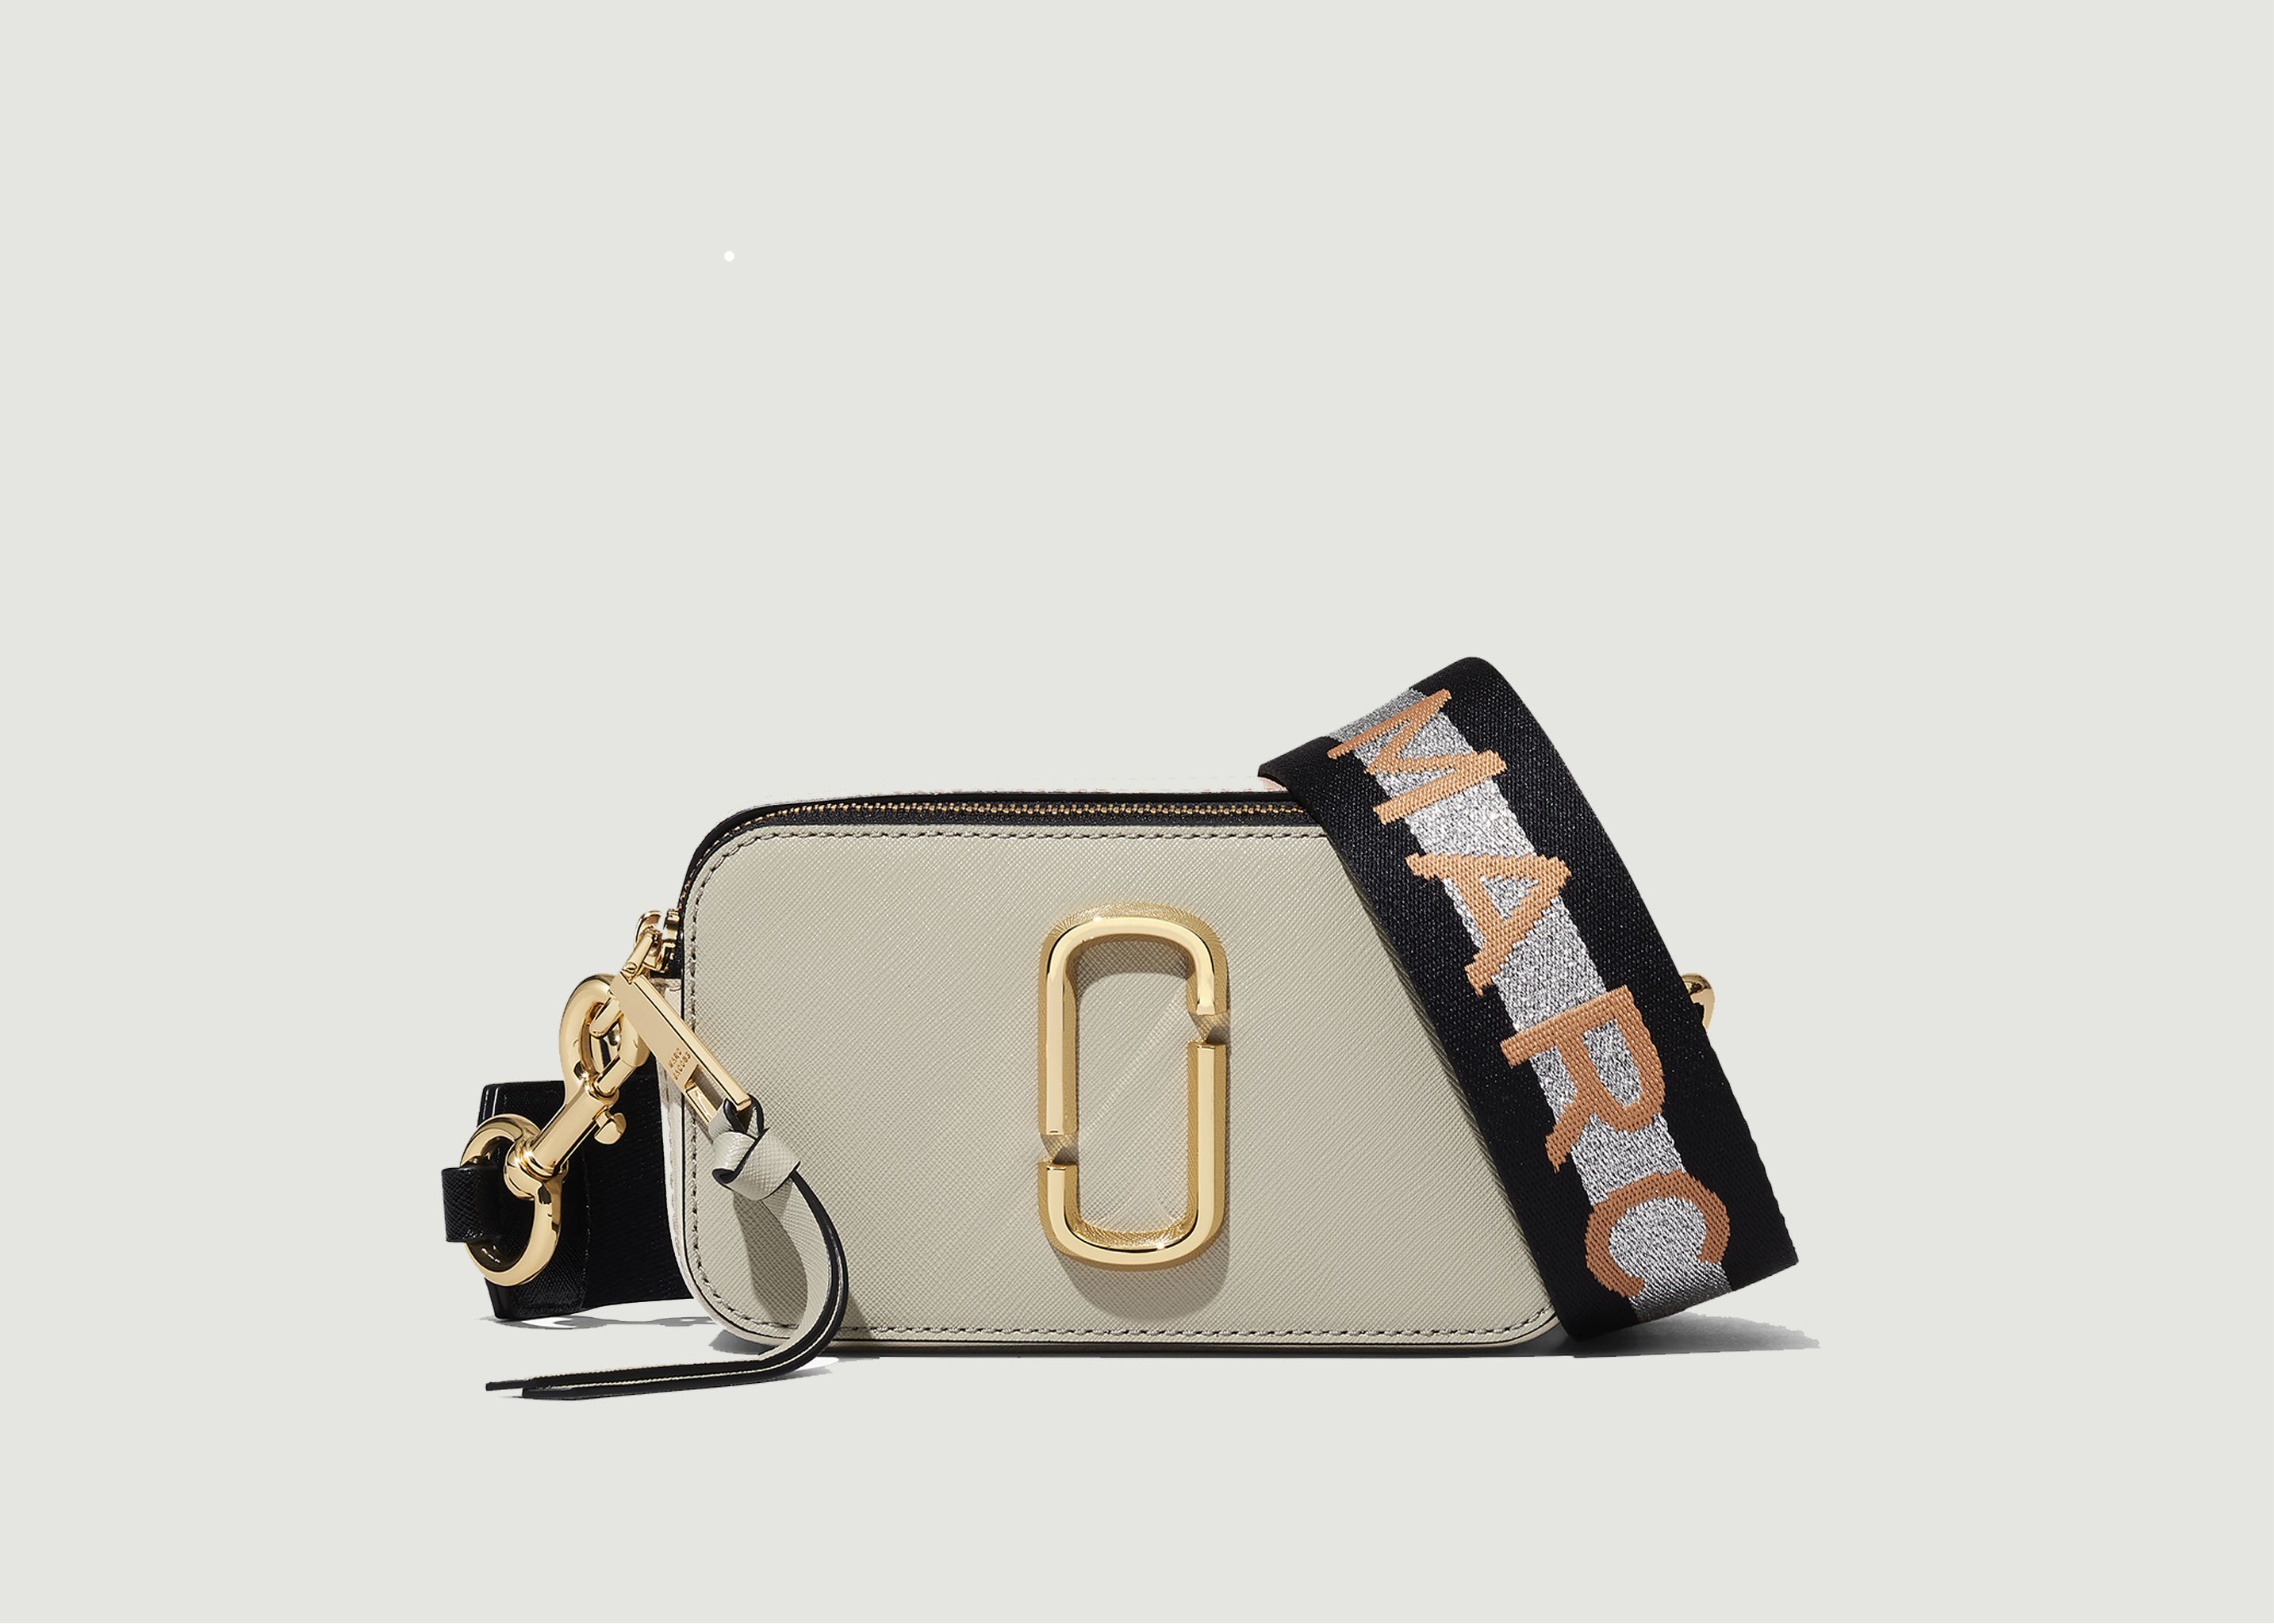 The Snapshot leather bag - Marc Jacobs